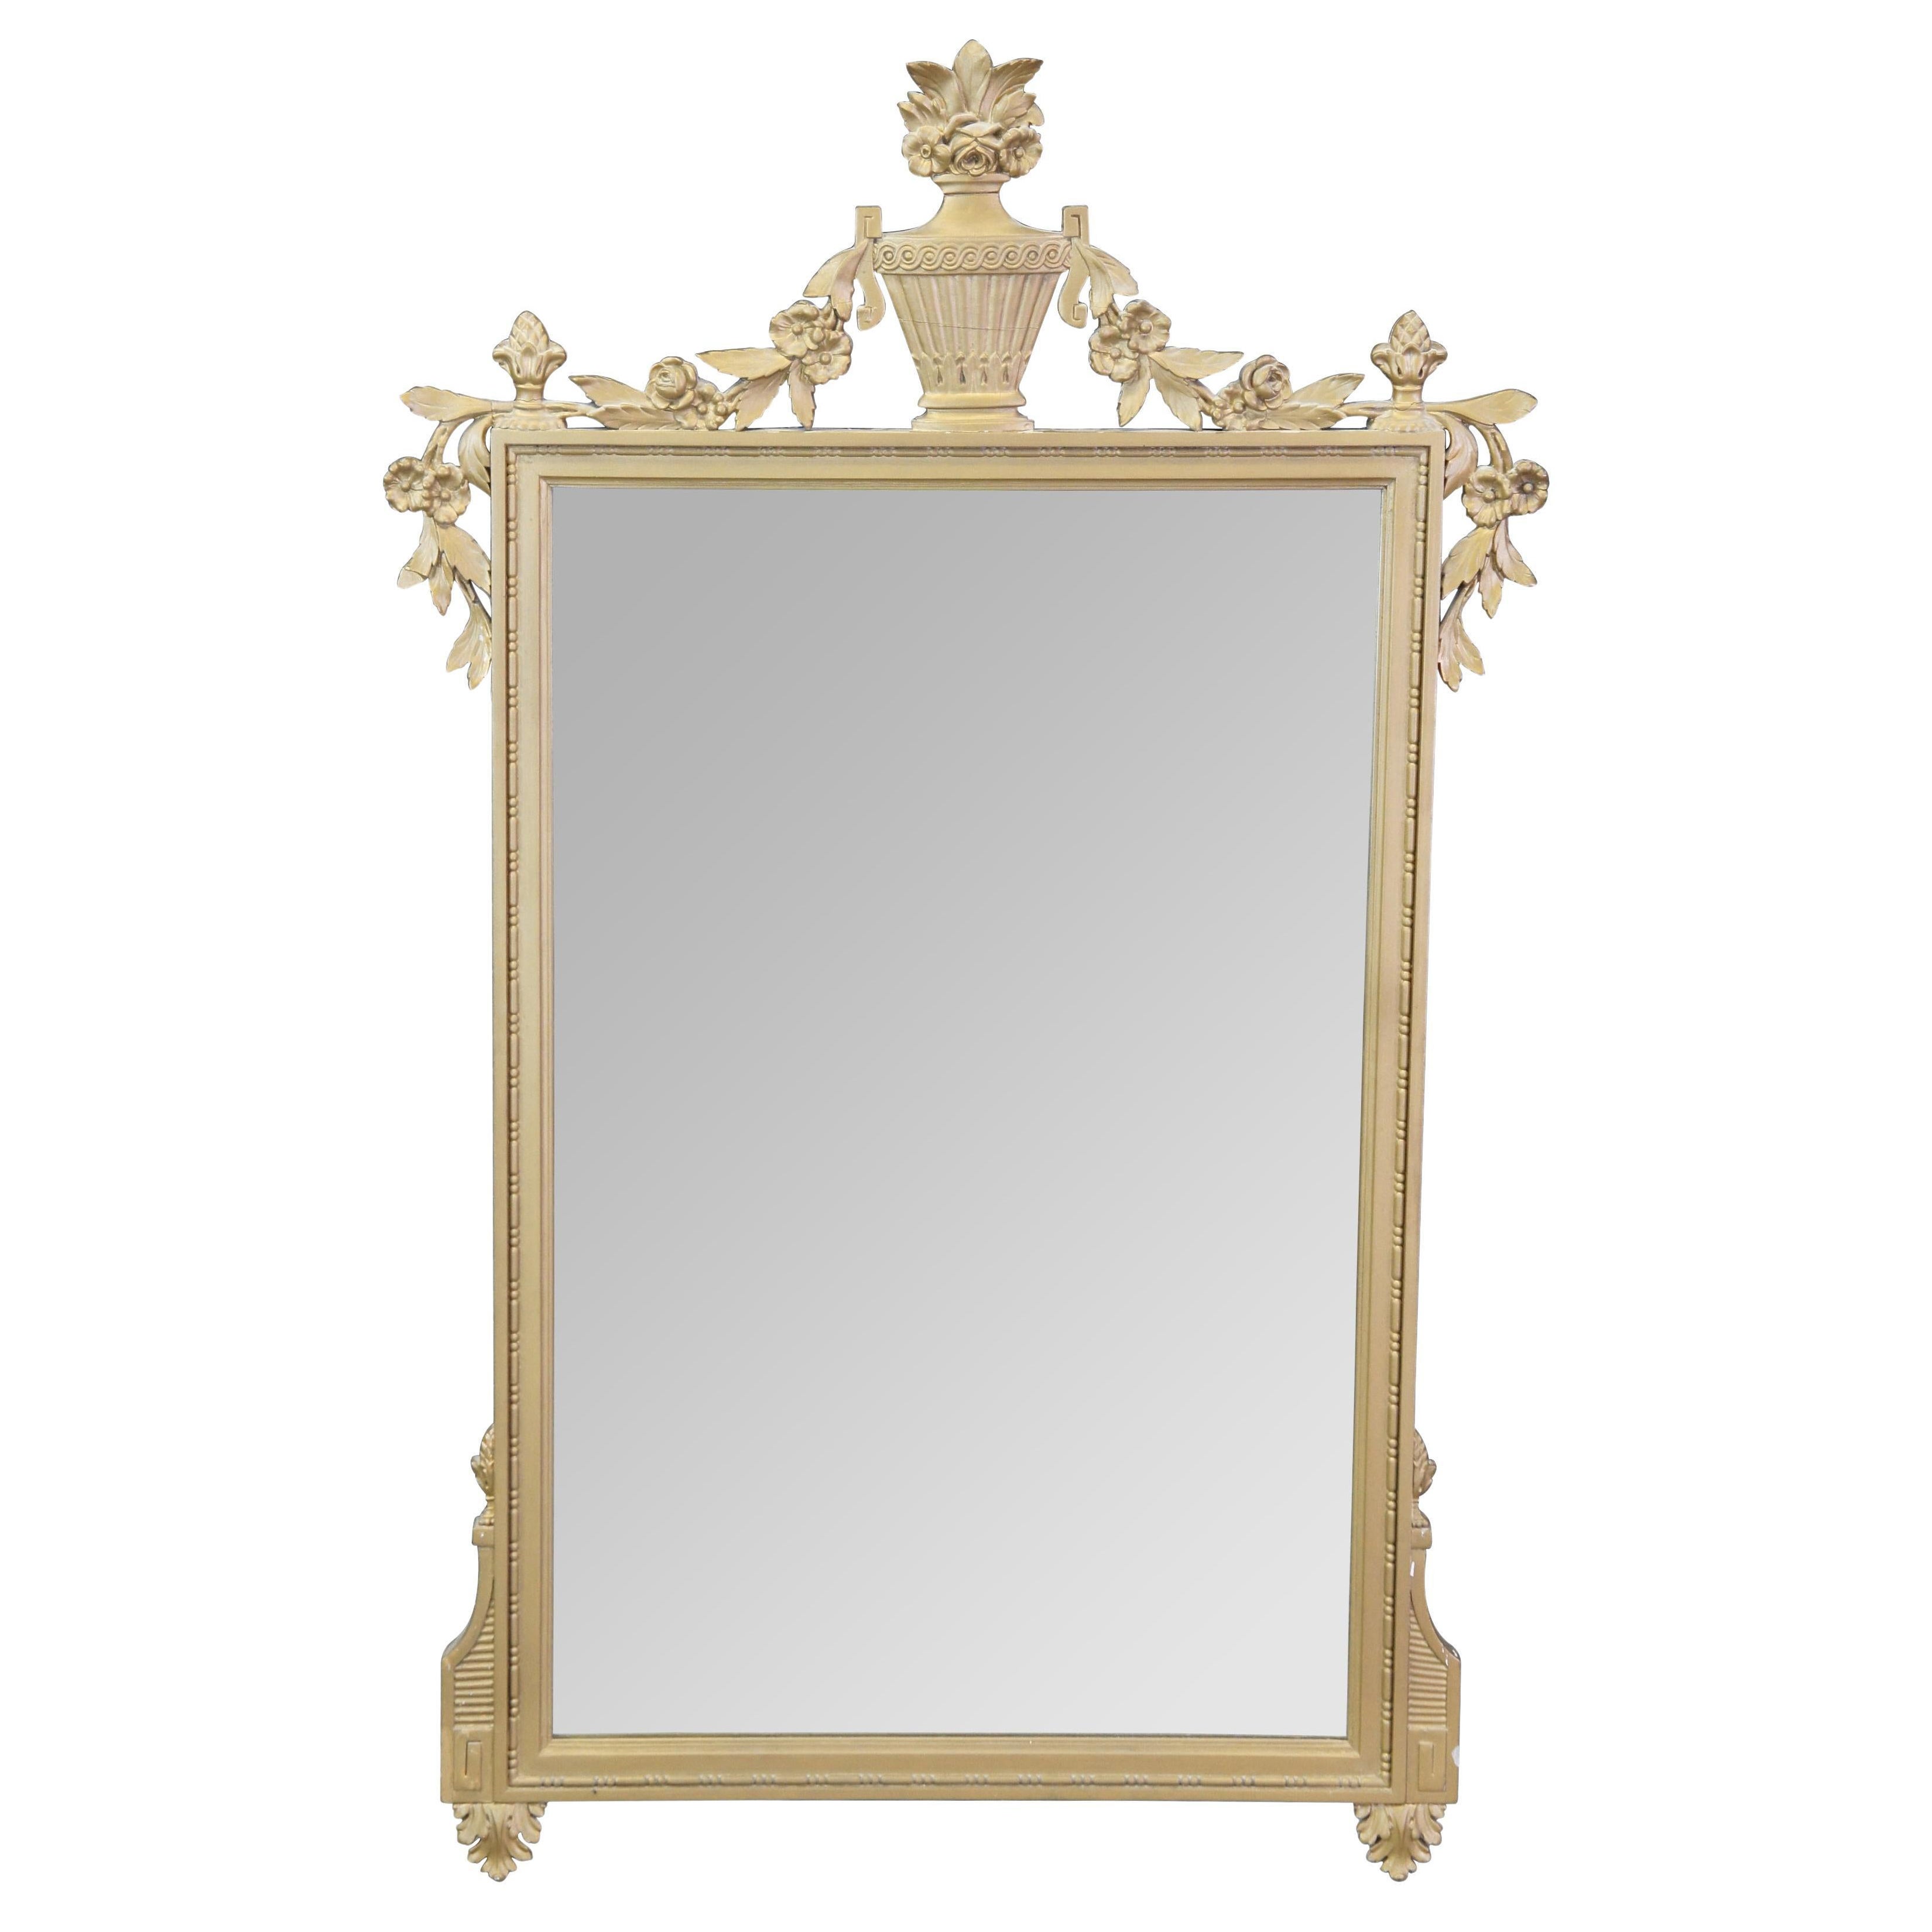 20th Century French Louis XV Style Gold Over Mantel Wall Hanging Mirror